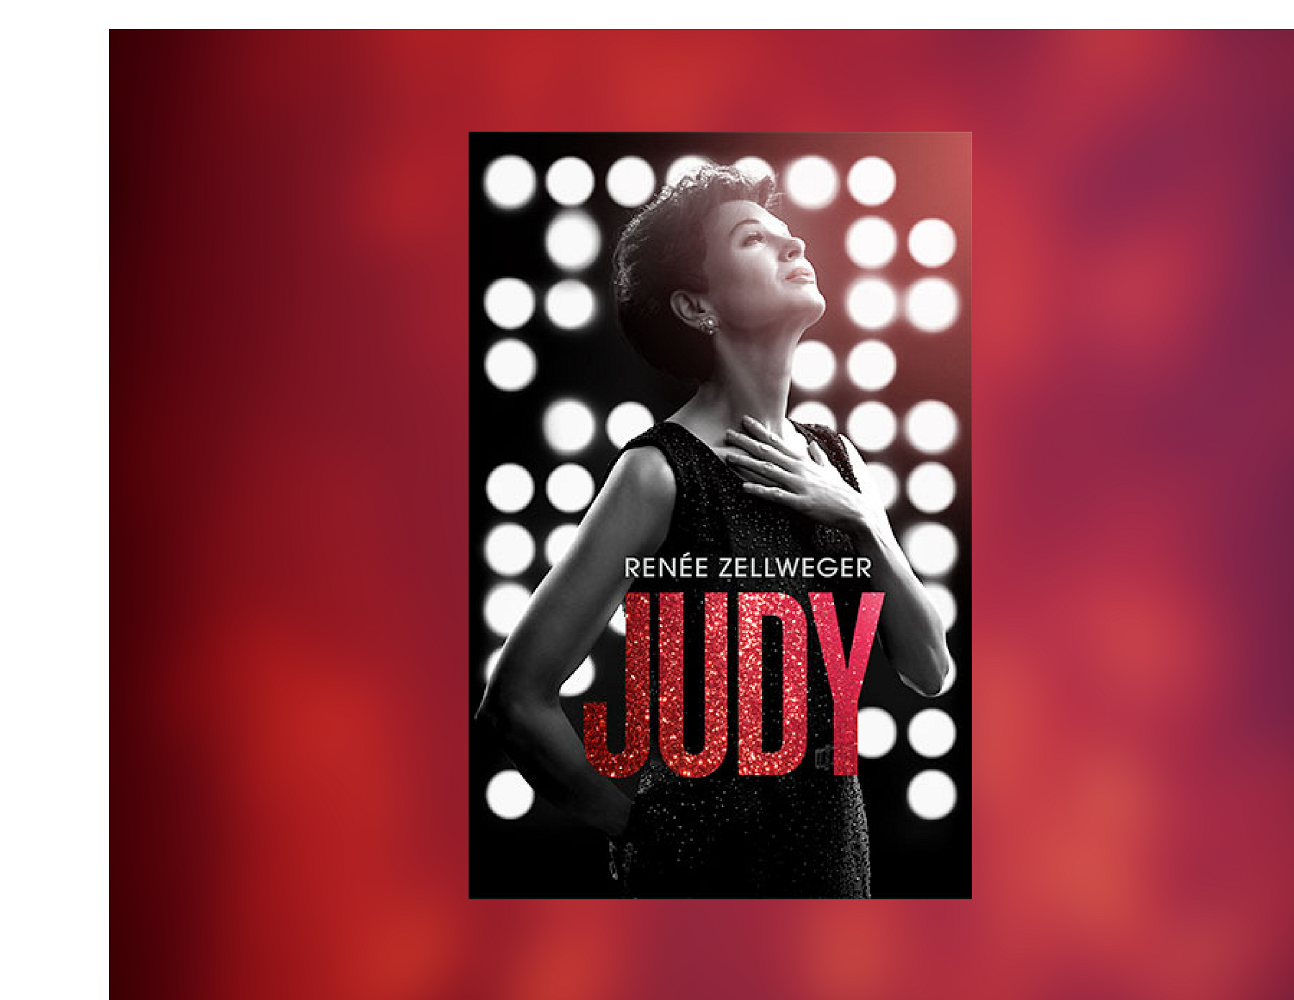 Picture of Judy Garland singing overlain by the film title, Judy.